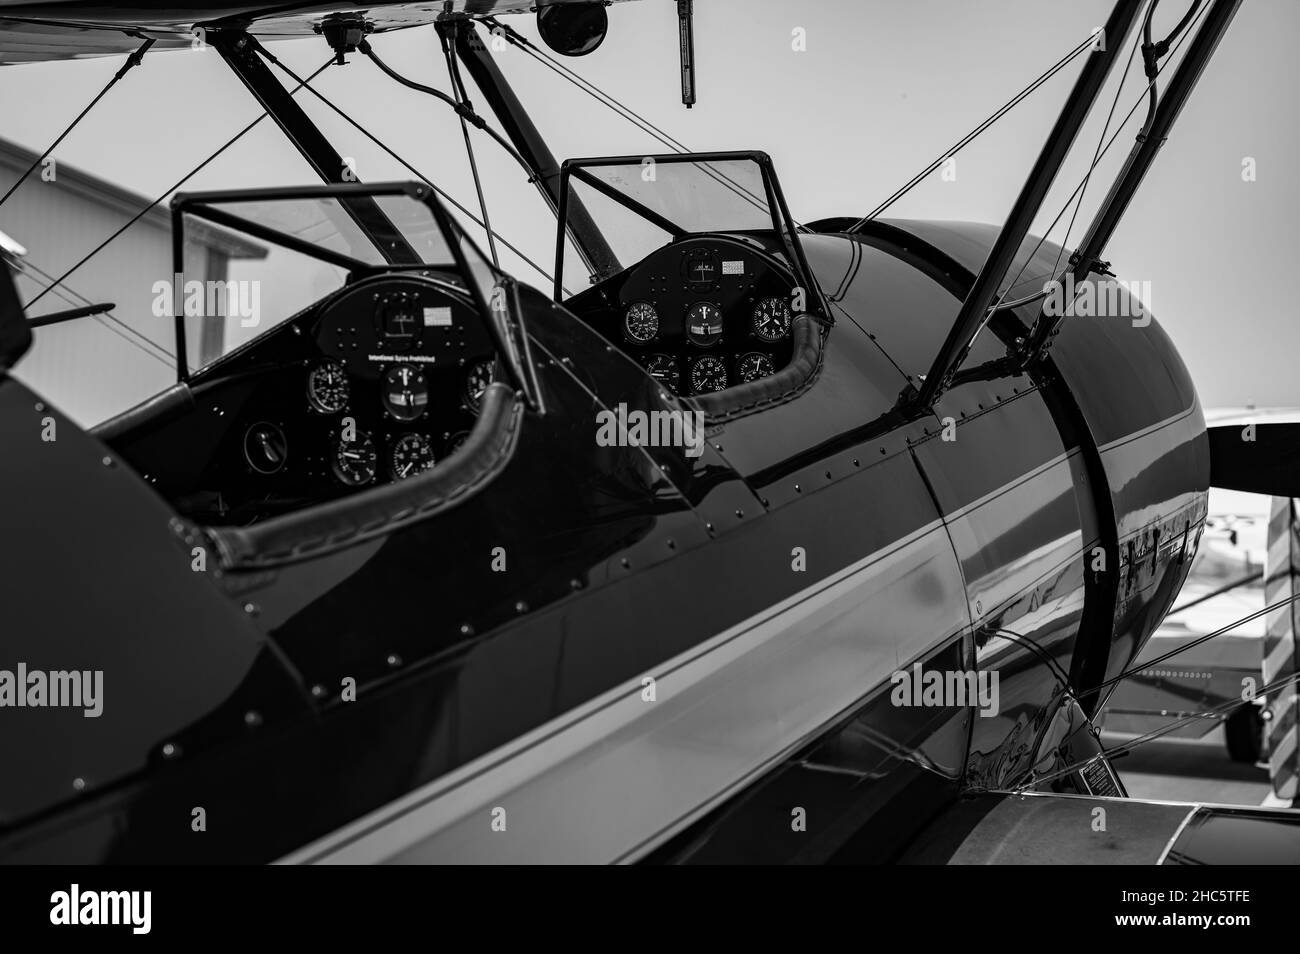 Grayscale image of a modern biplane with a beautiful modern design Stock Photo